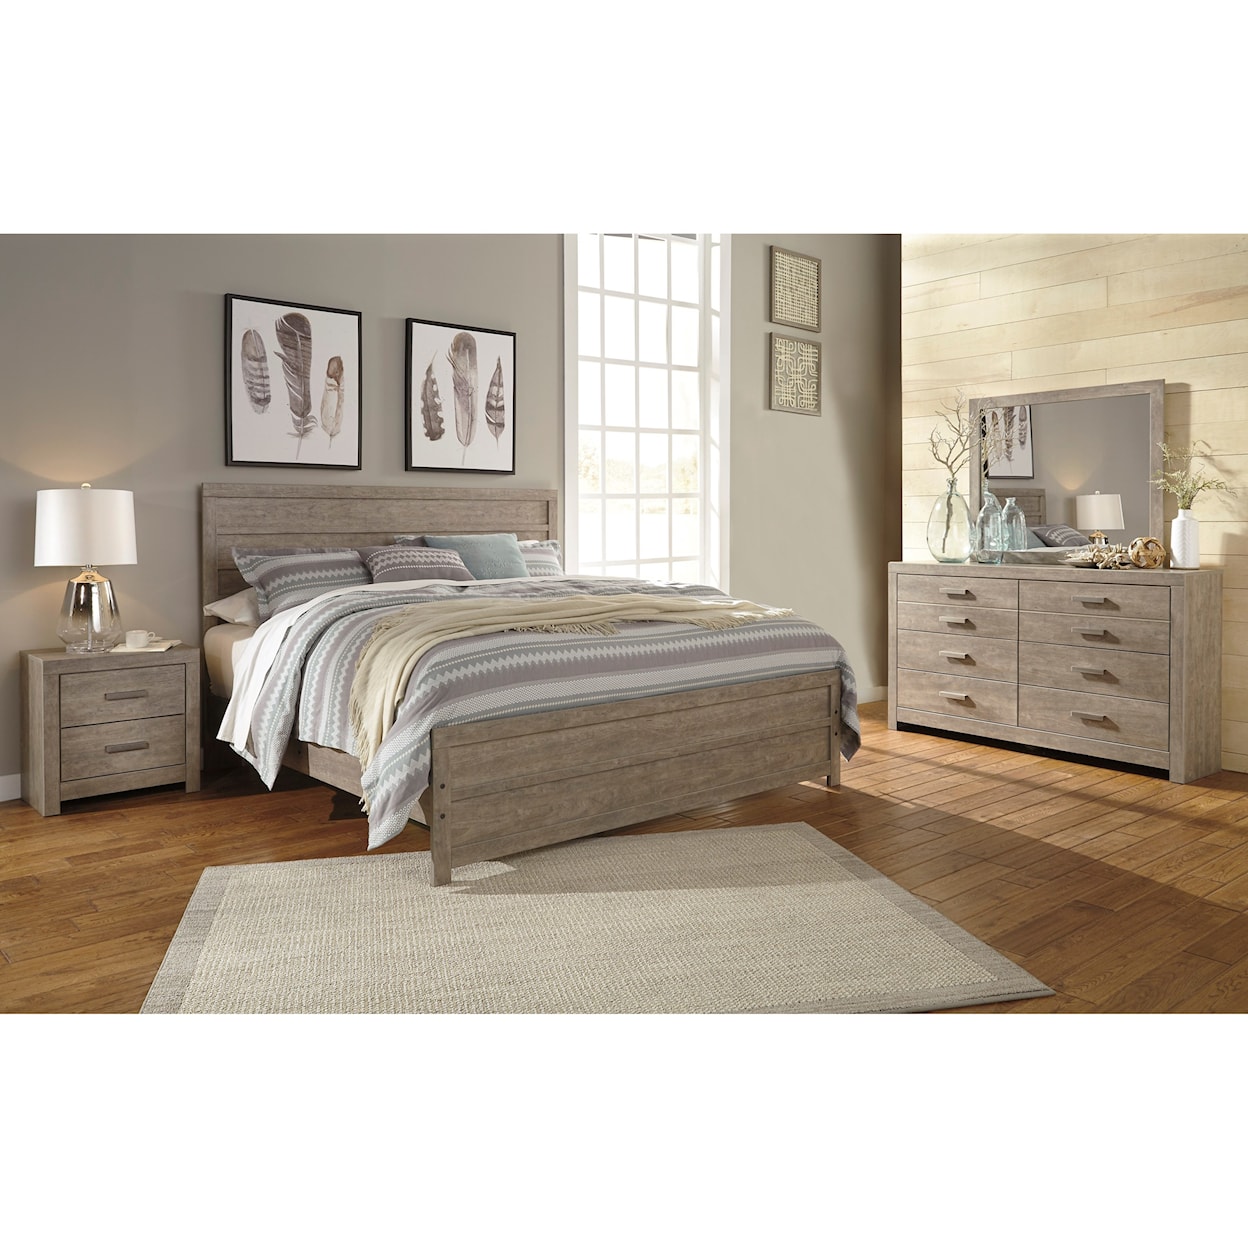 Signature Clover 4 Piece King Bedroom Group